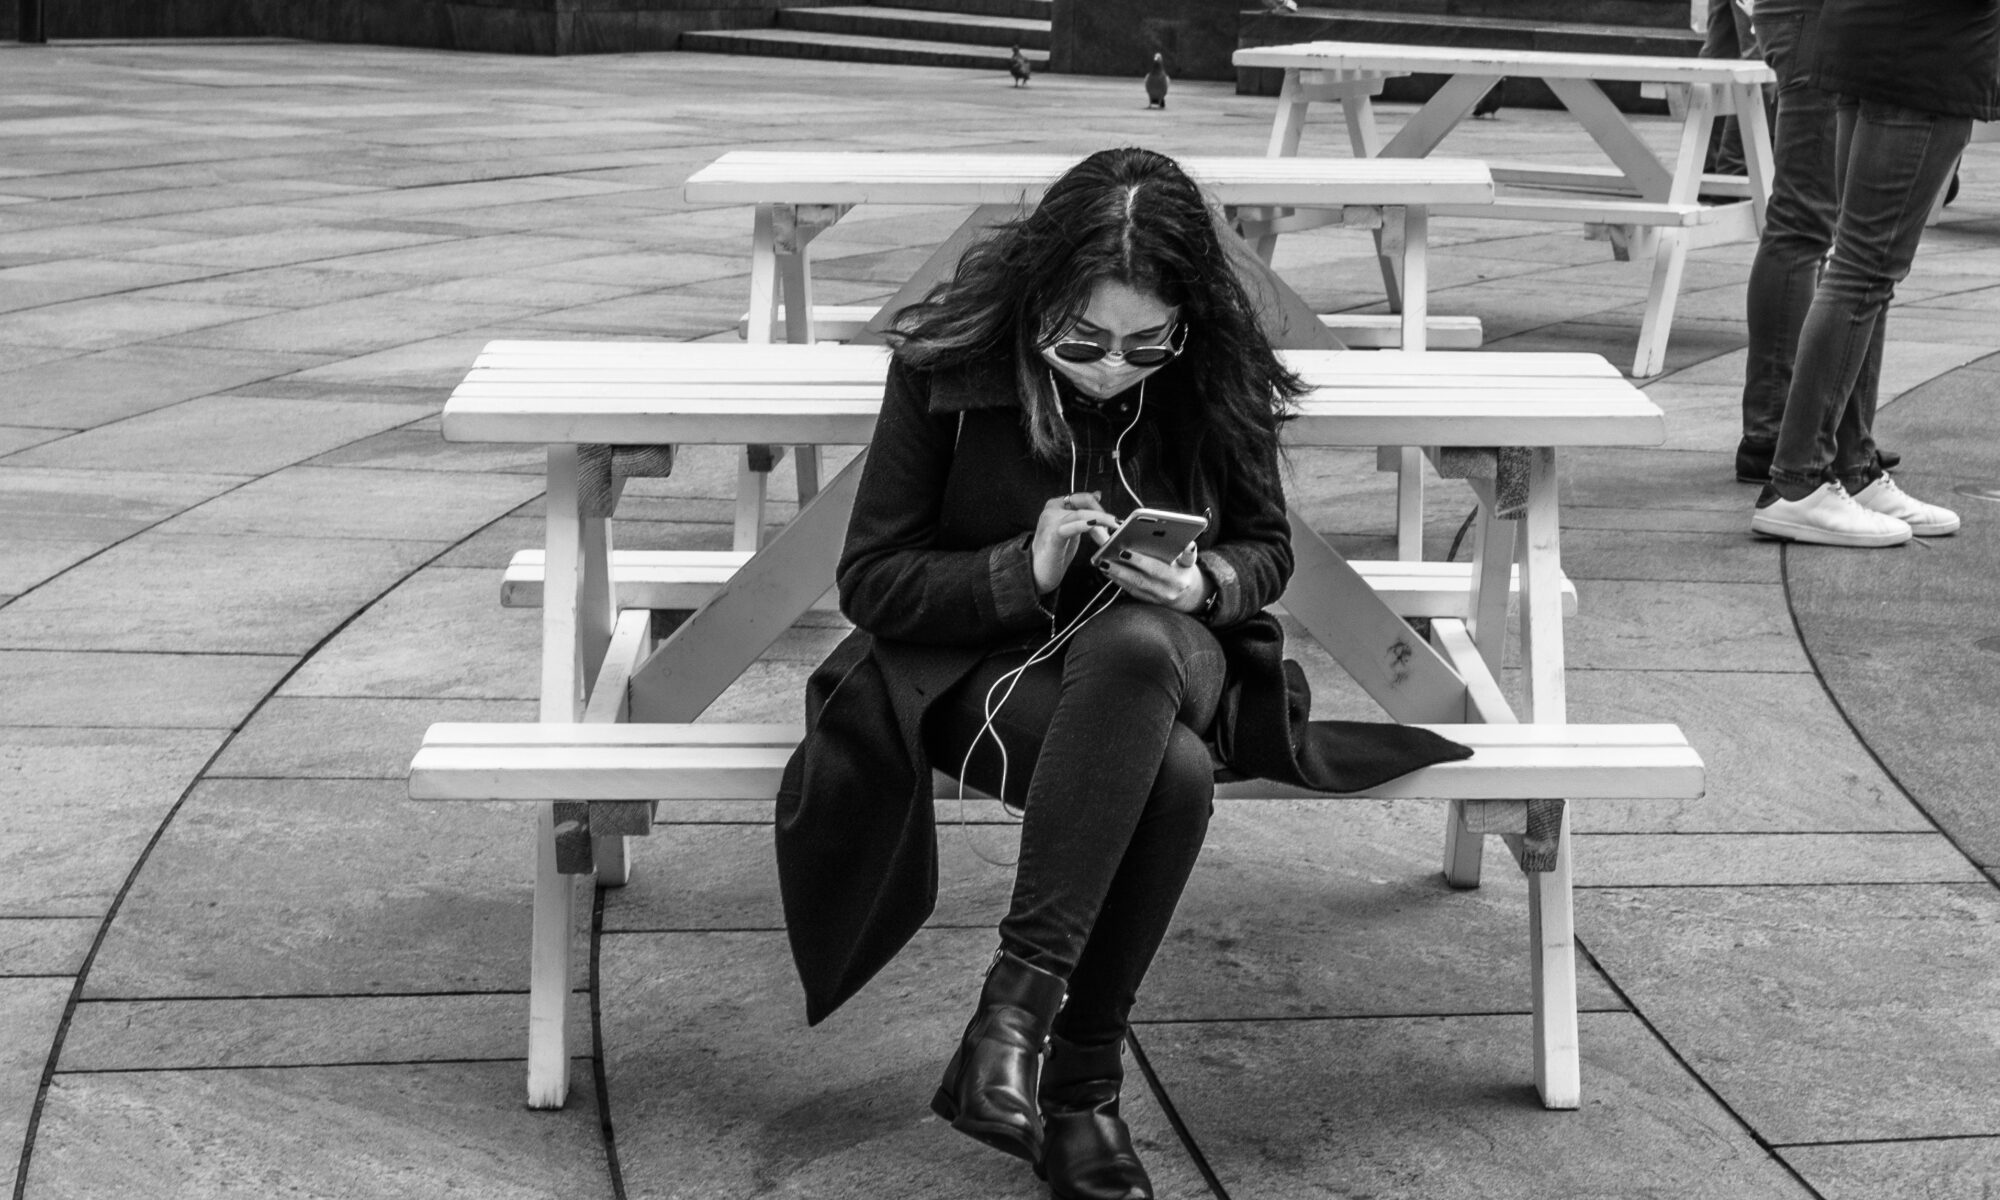 black and white photo of a woman on a bench using her smart phone